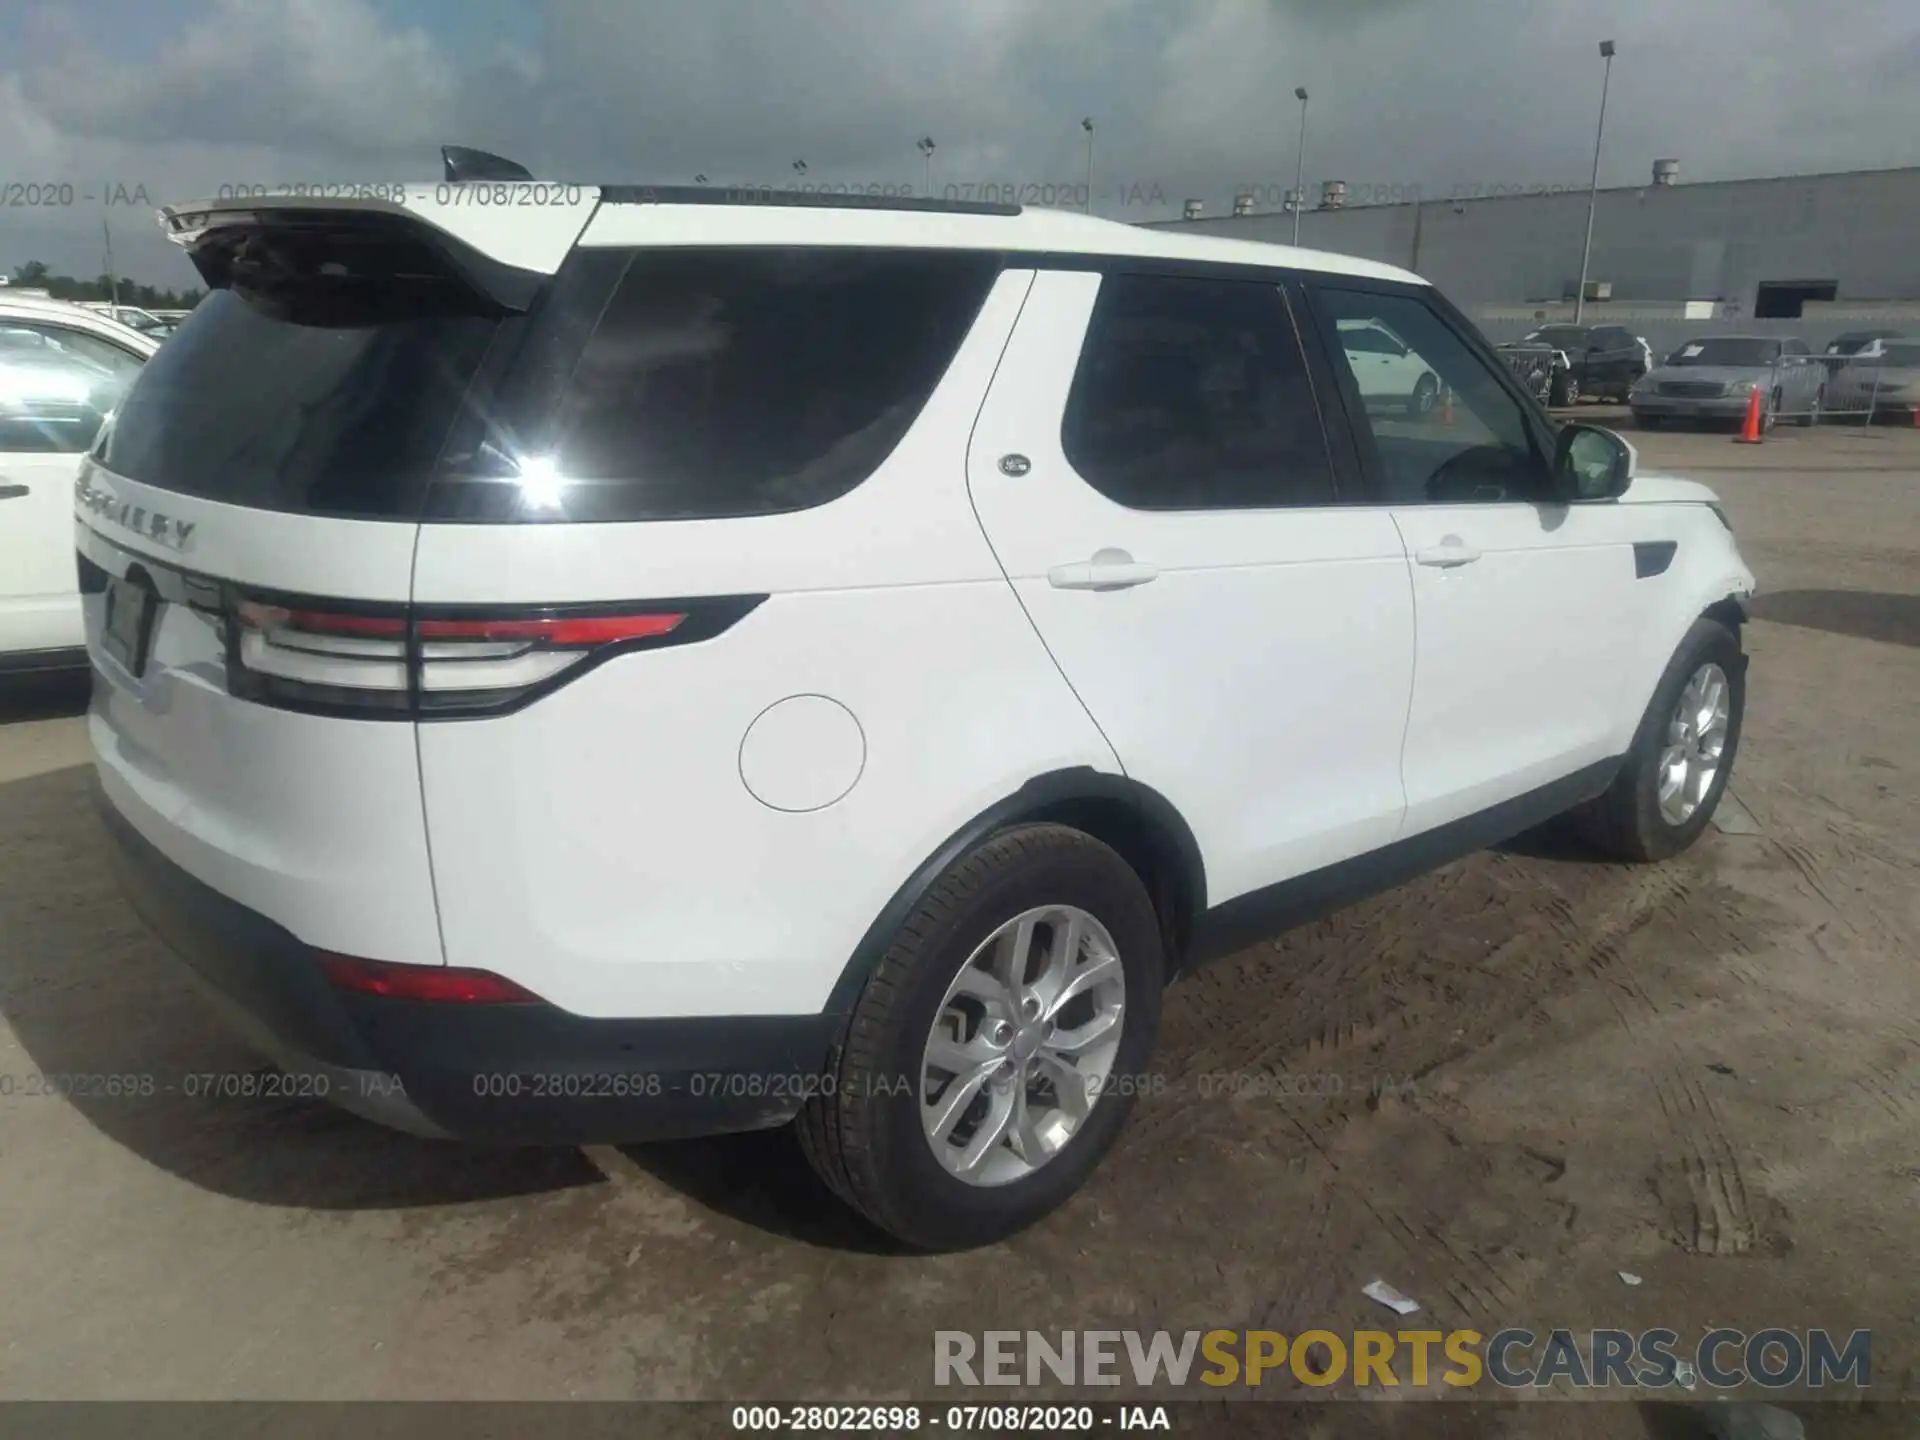 4 Photograph of a damaged car SALRG2RV3L2426232 LAND ROVER DISCOVERY 2020